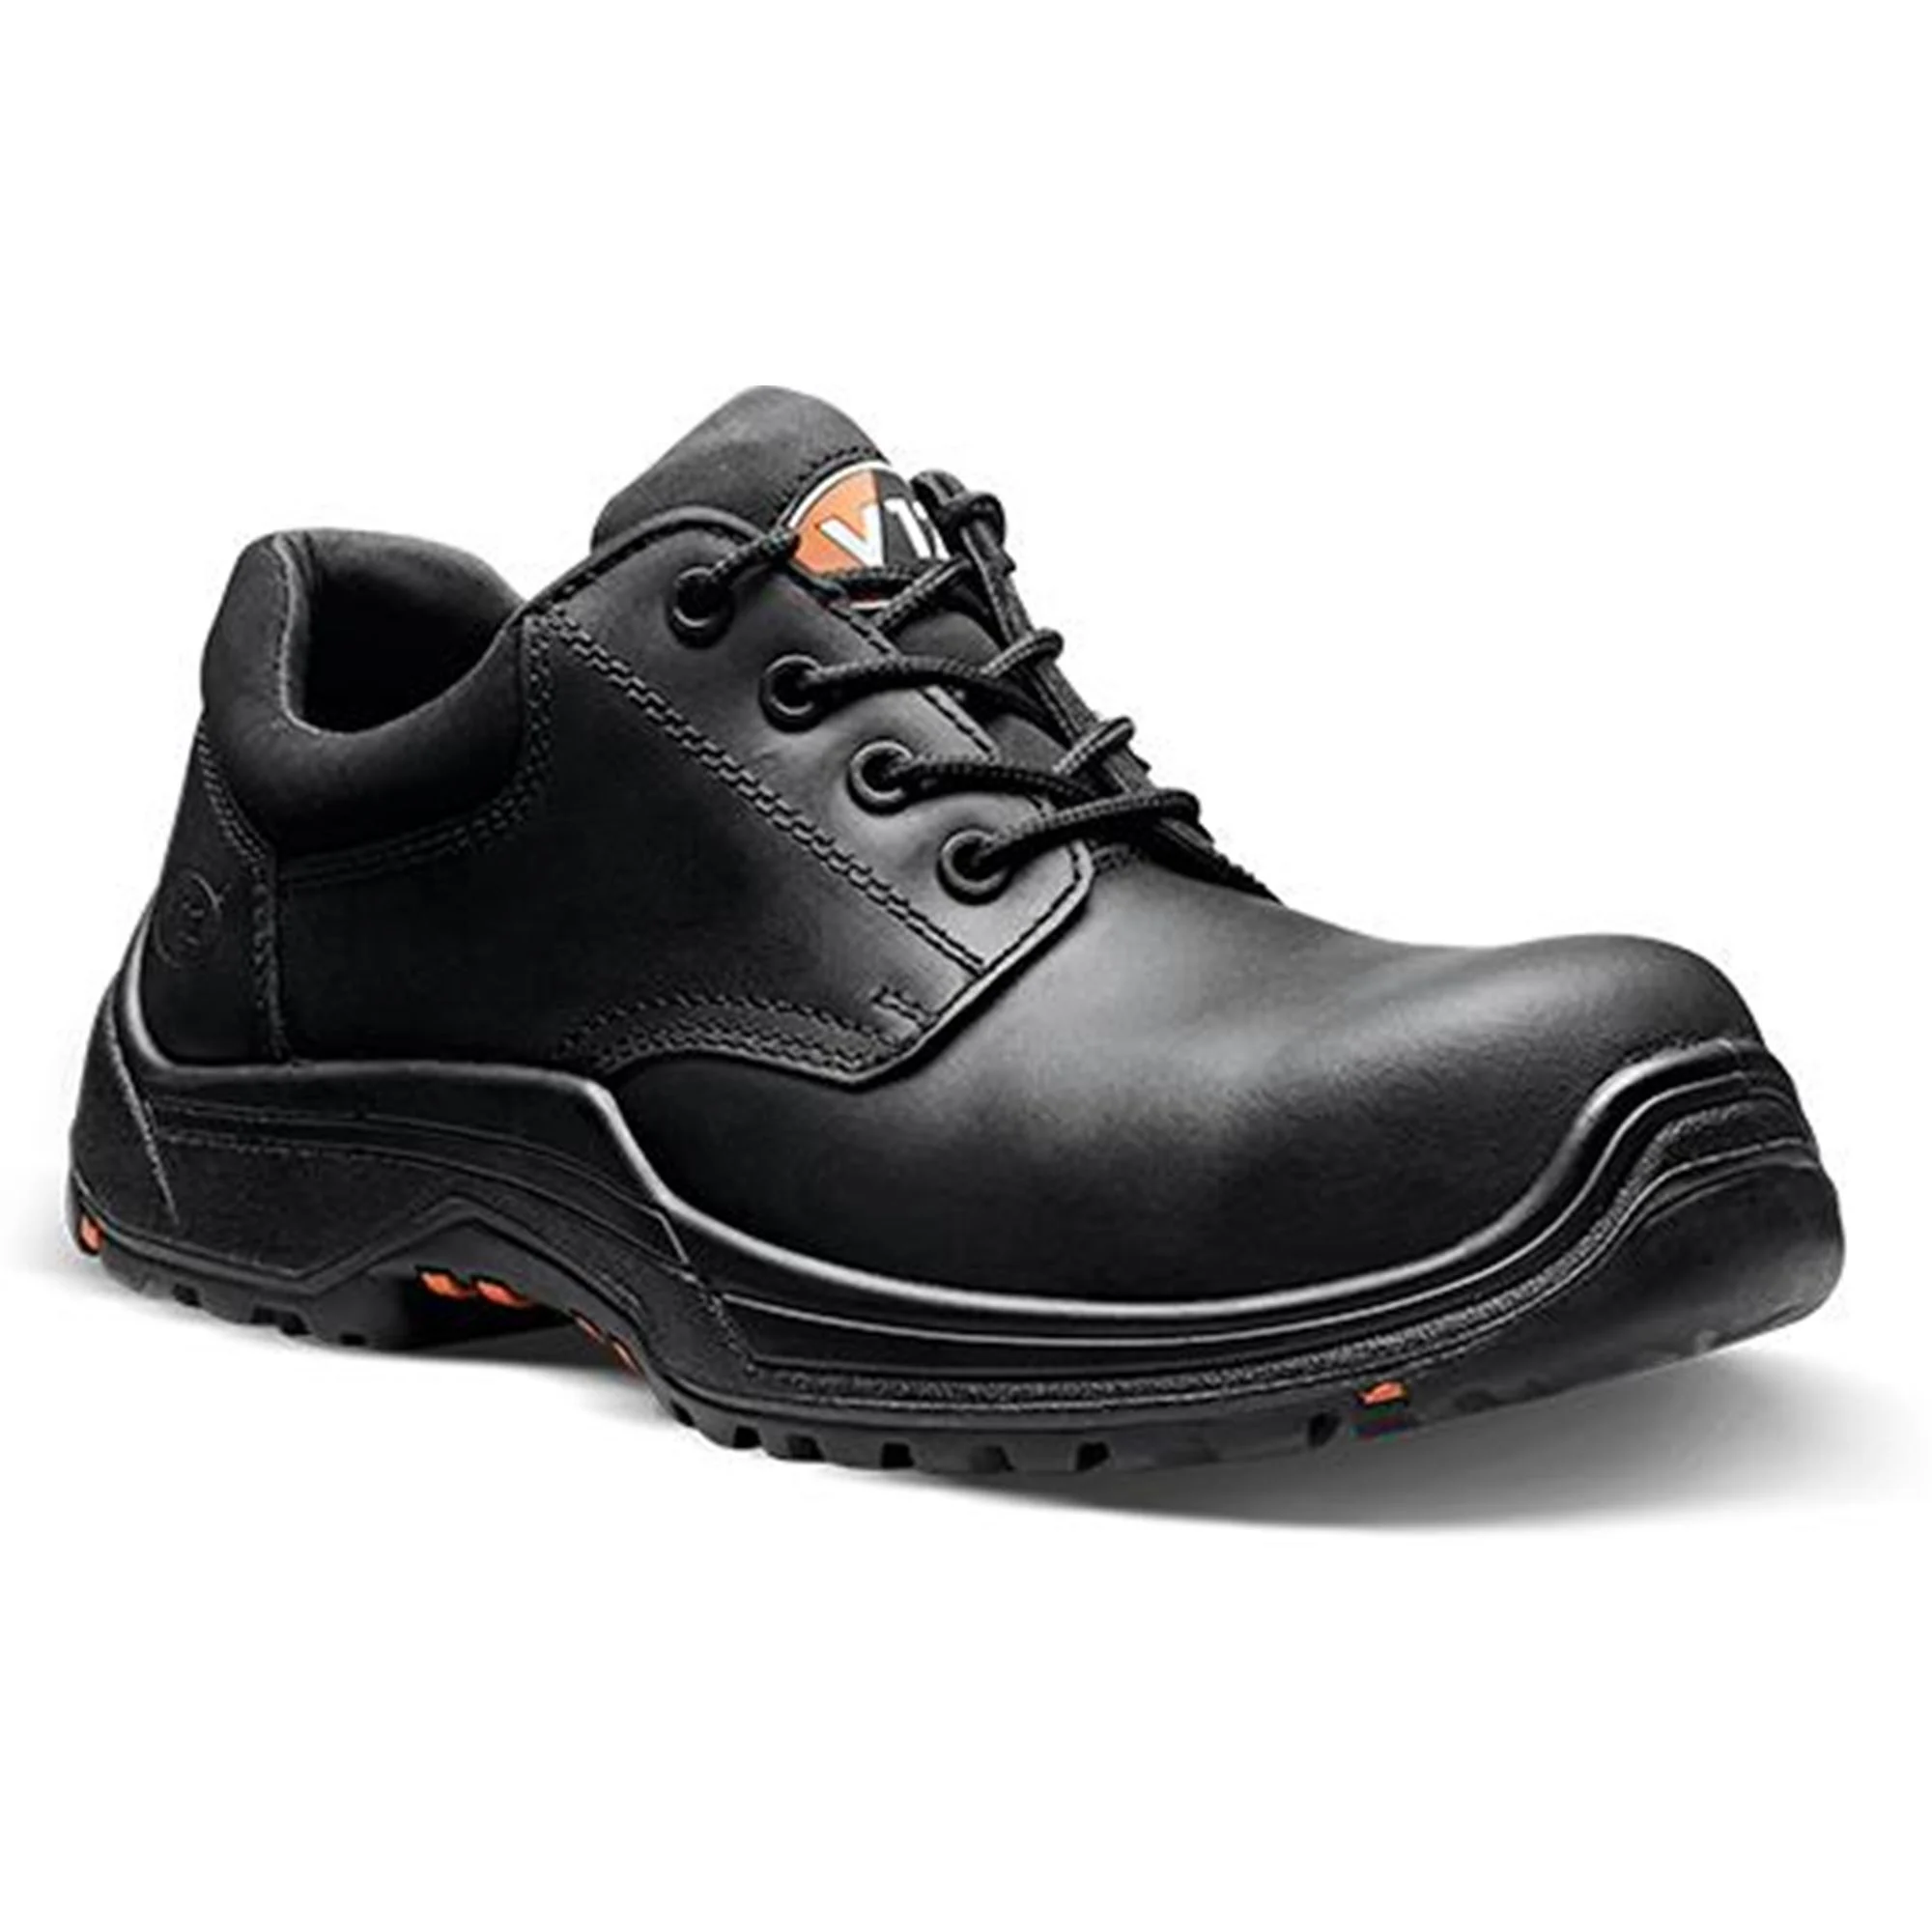 Safety Shoes Size 40 High Cut image 1